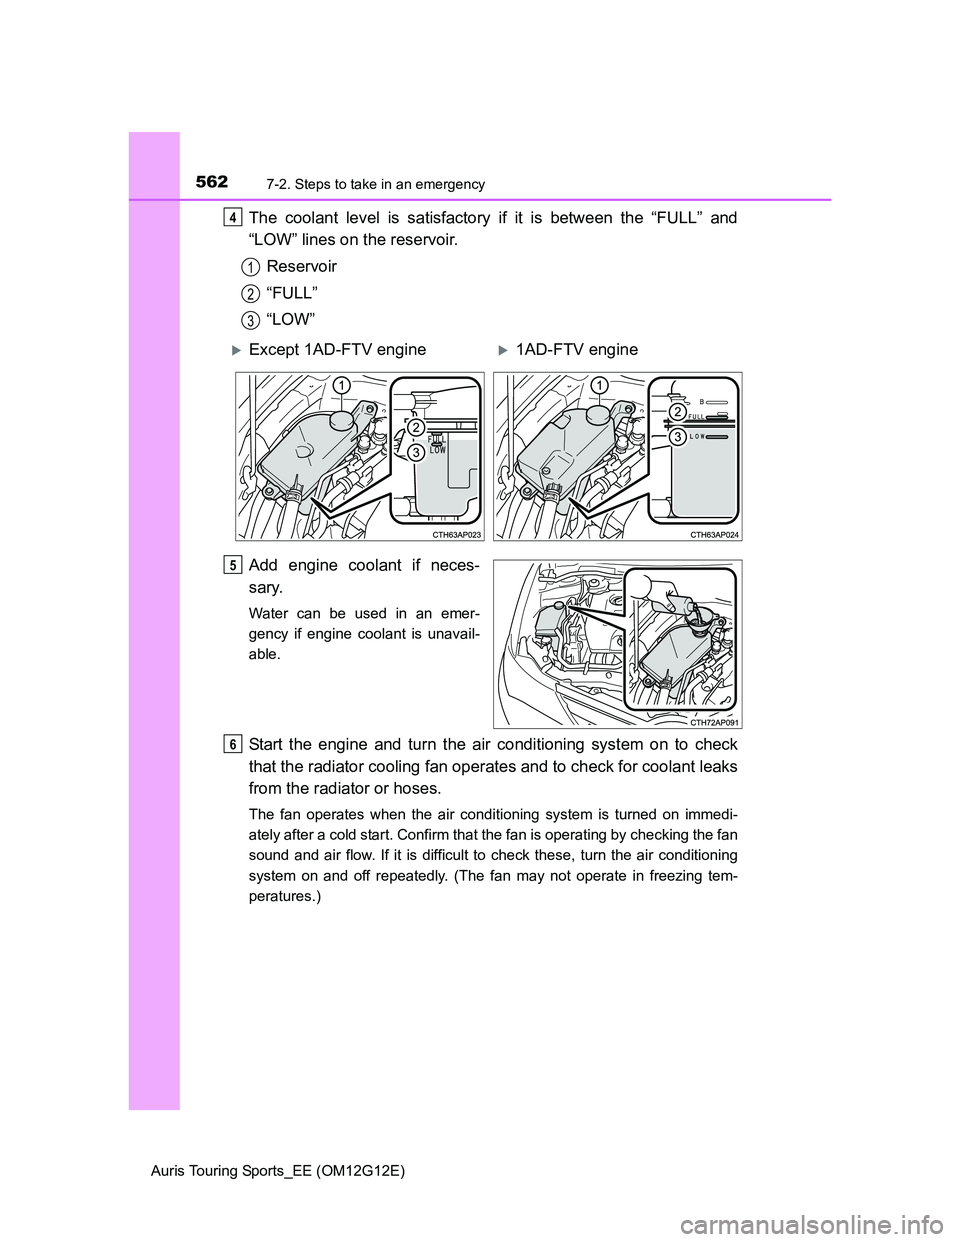 TOYOTA AURIS TOURING SPORTS 2013  Owners Manual 5627-2. Steps to take in an emergency
Auris Touring Sports_EE (OM12G12E)
The coolant level is satisfactory if it is between the “FULL” and
“LOW” lines on the reservoir.
Reservoir
“FULL”
�